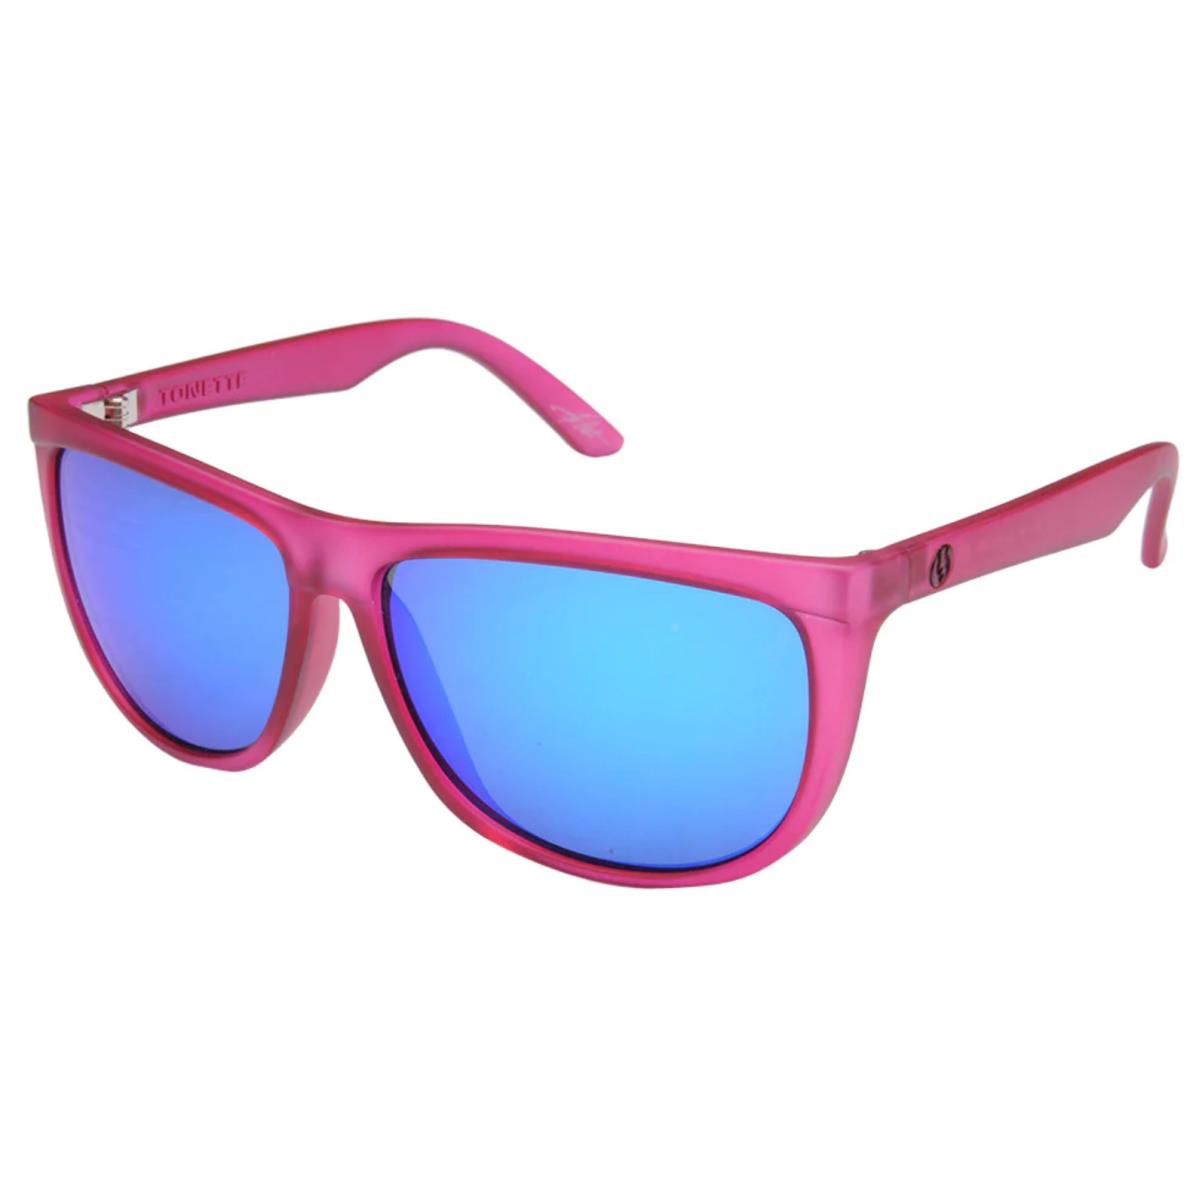 Electric Visual Tonette Panther Pink Blue Chrome Sunglasses Unisex Italy